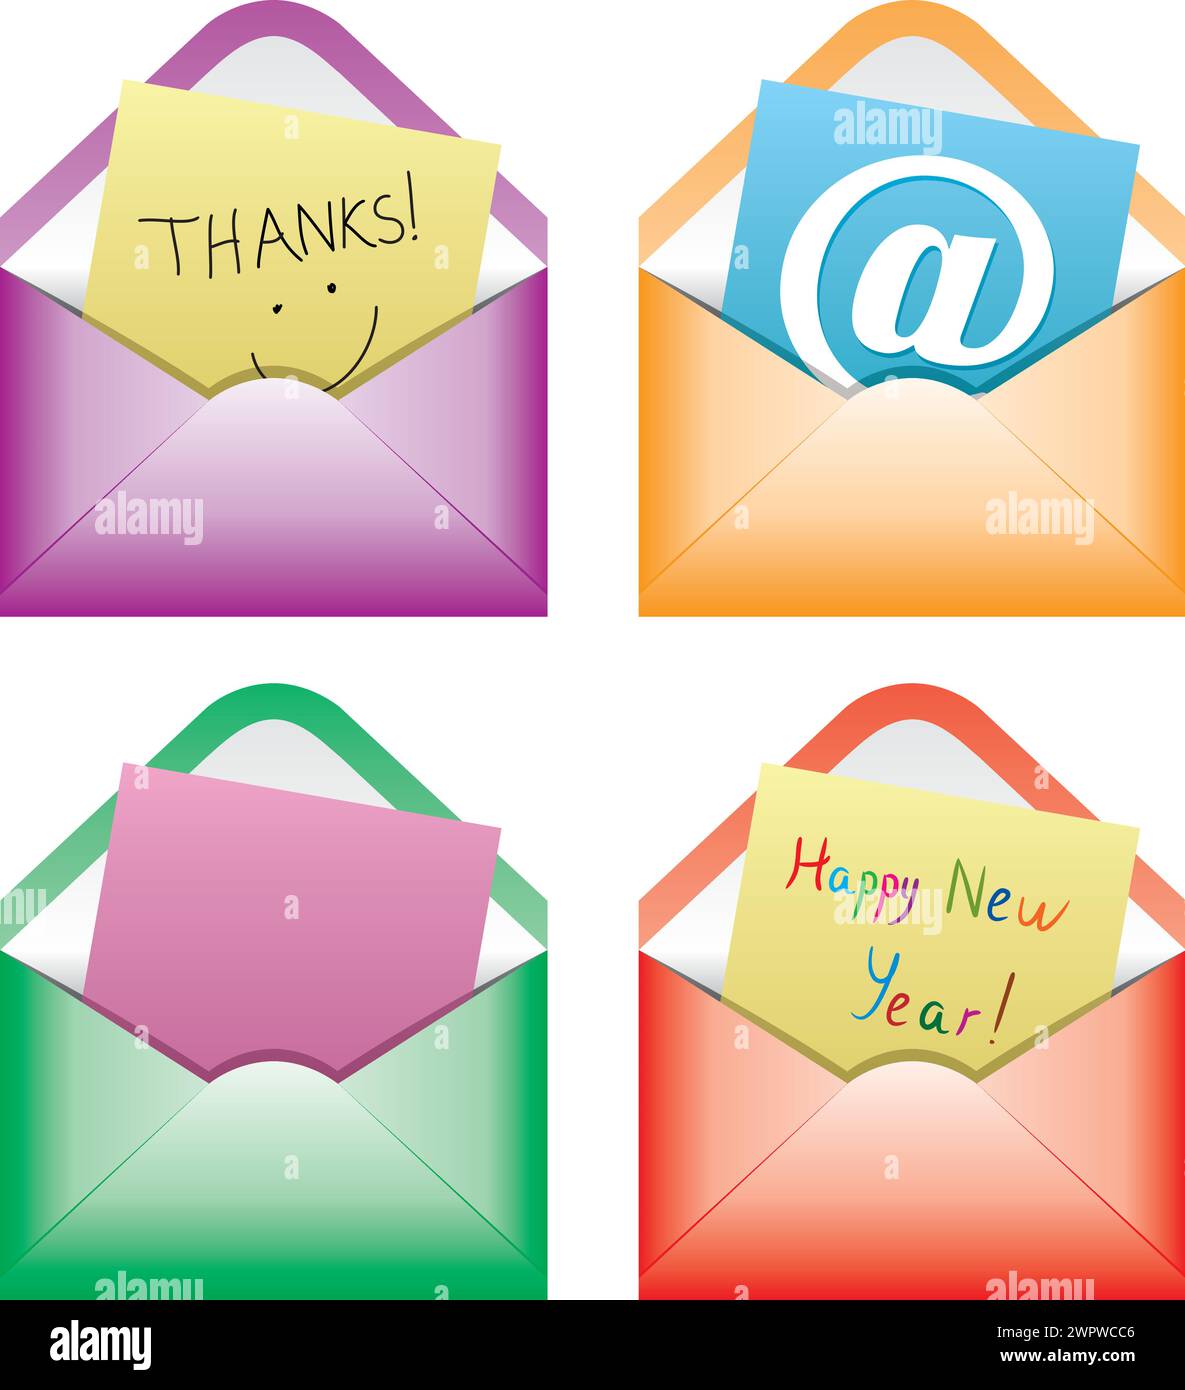 vector design of paper notes in envelopes Stock Vector